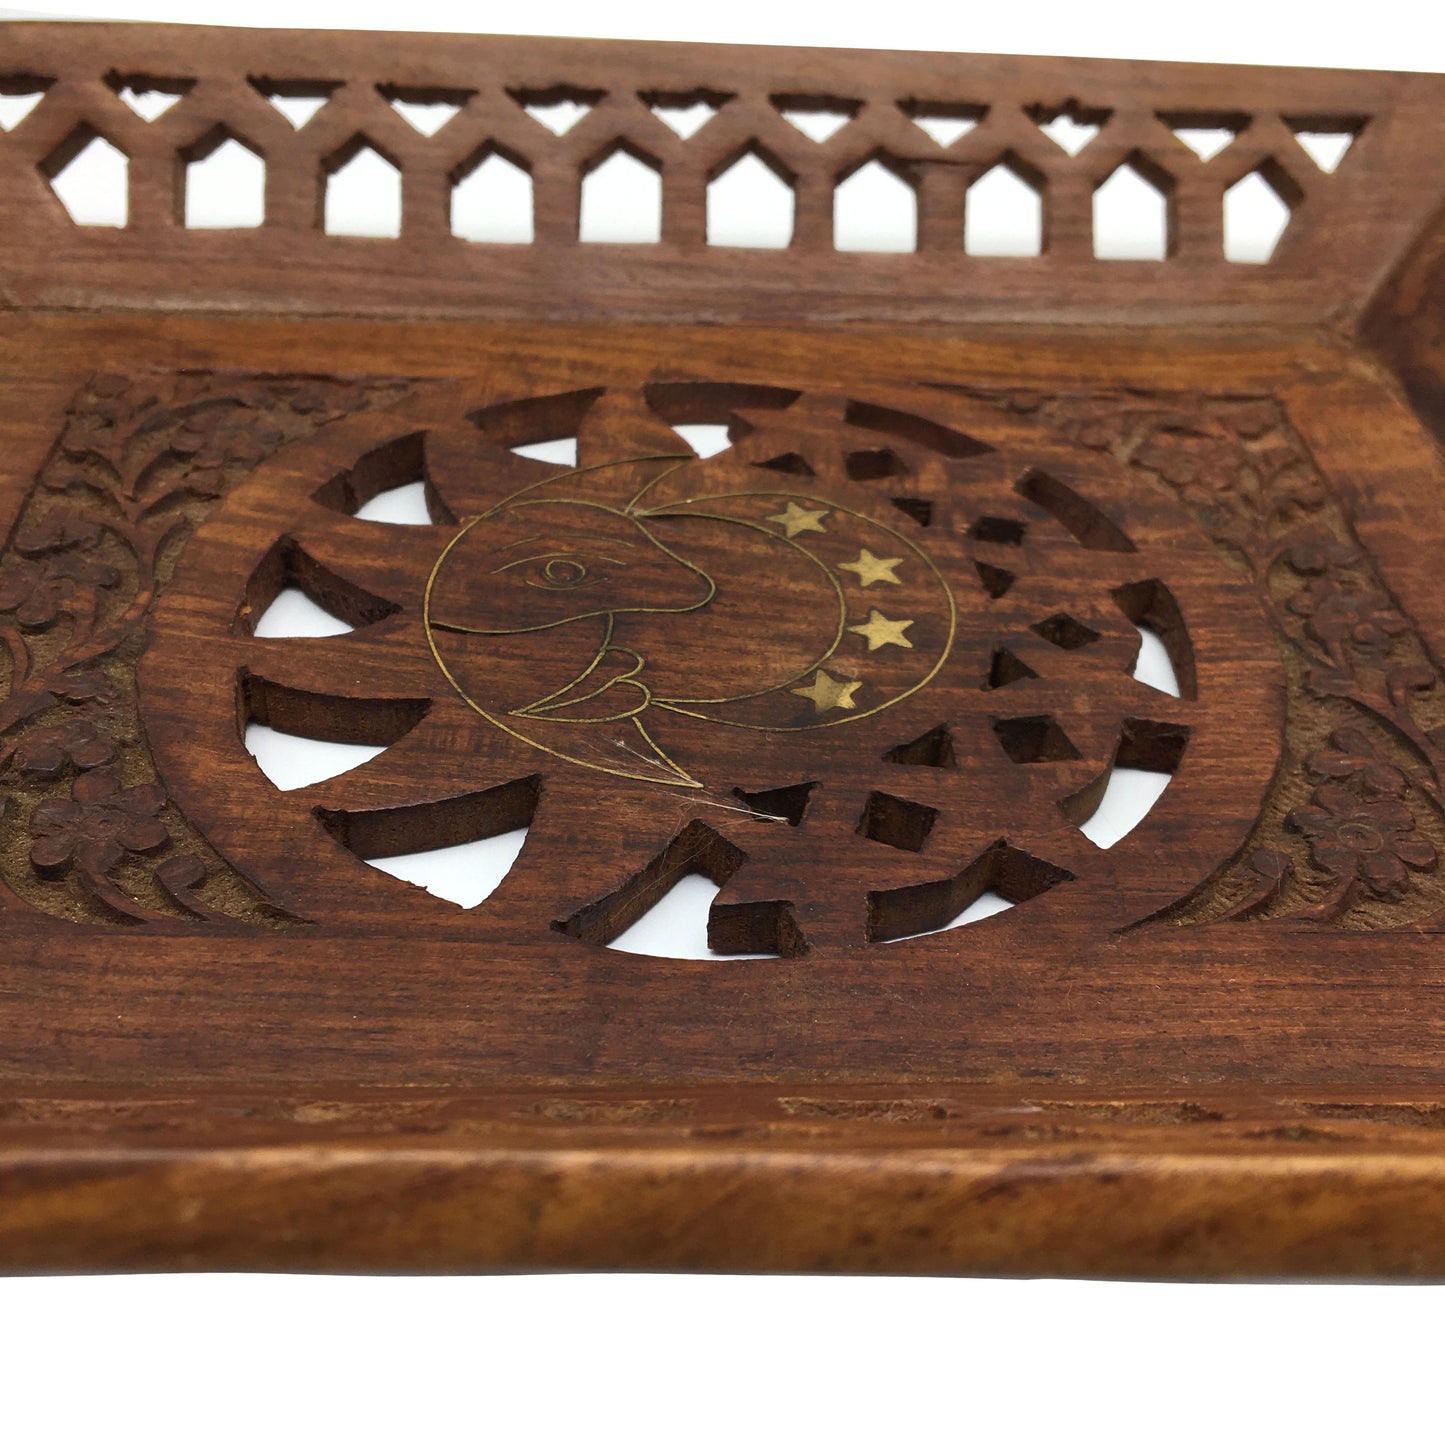 Vintage Rustic India Natural Wooden Decorative Handmade Brass Inlays Tray